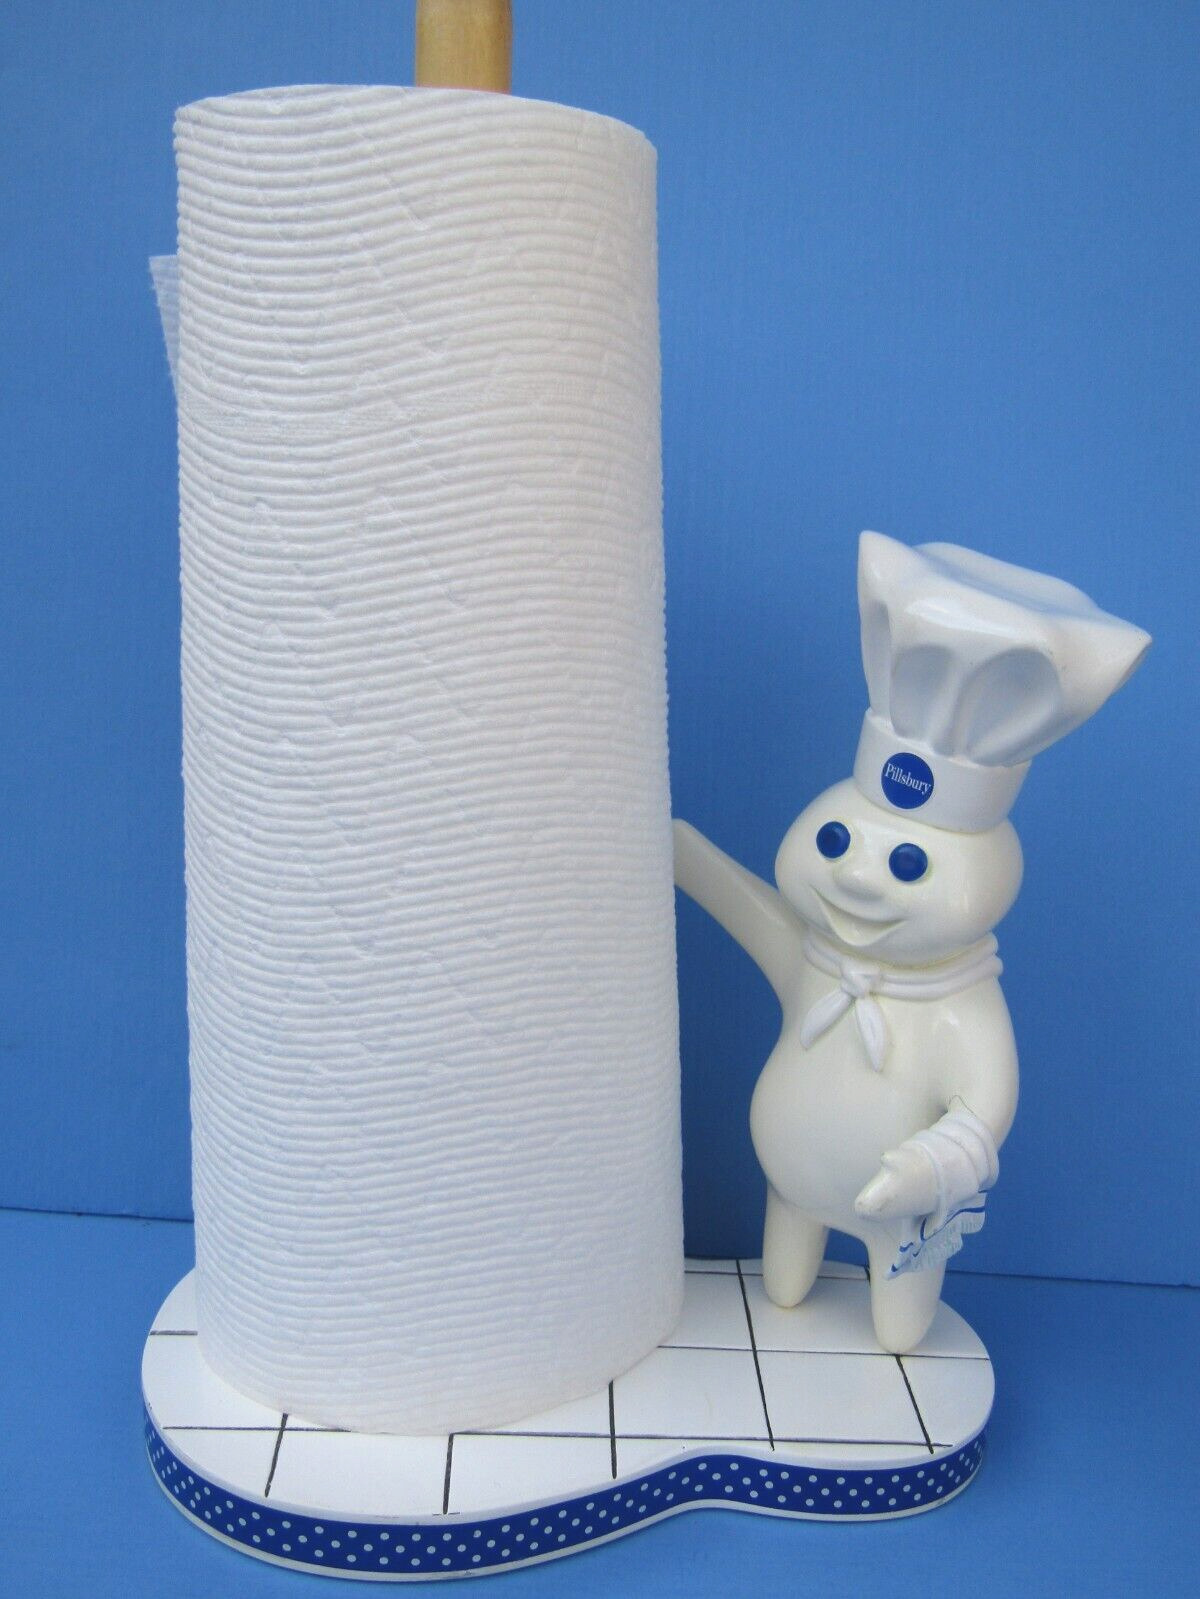 FS PILLSBURY DOUGHBOY FIGURAL PAPER TOWEL HOLDER by Simson Giftware 2006 READ